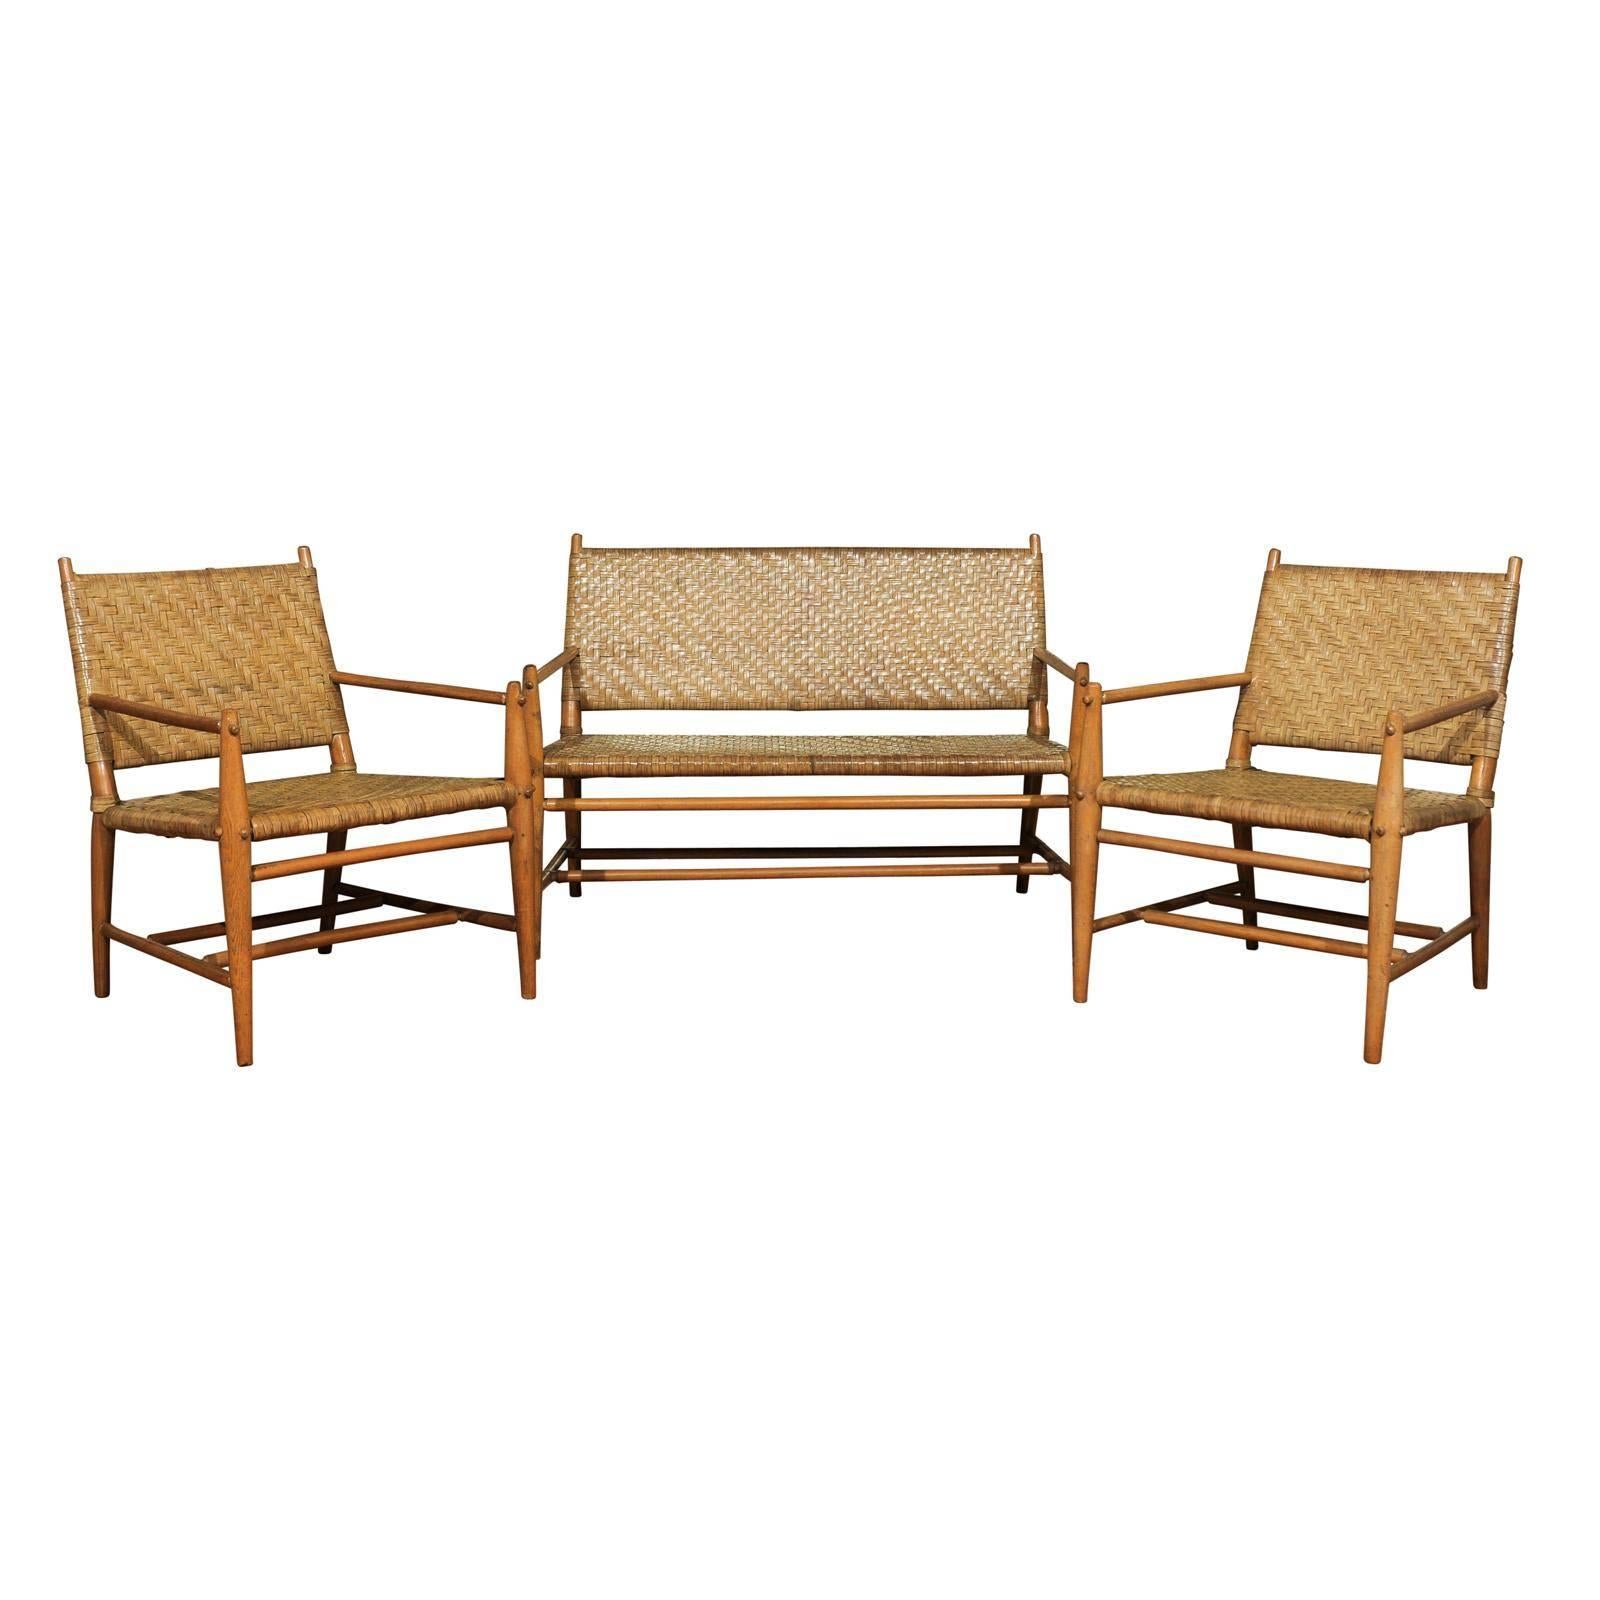 Exceptional Modern Seating Set by Russel Wright for Old Hickory, circa 1940 For Sale